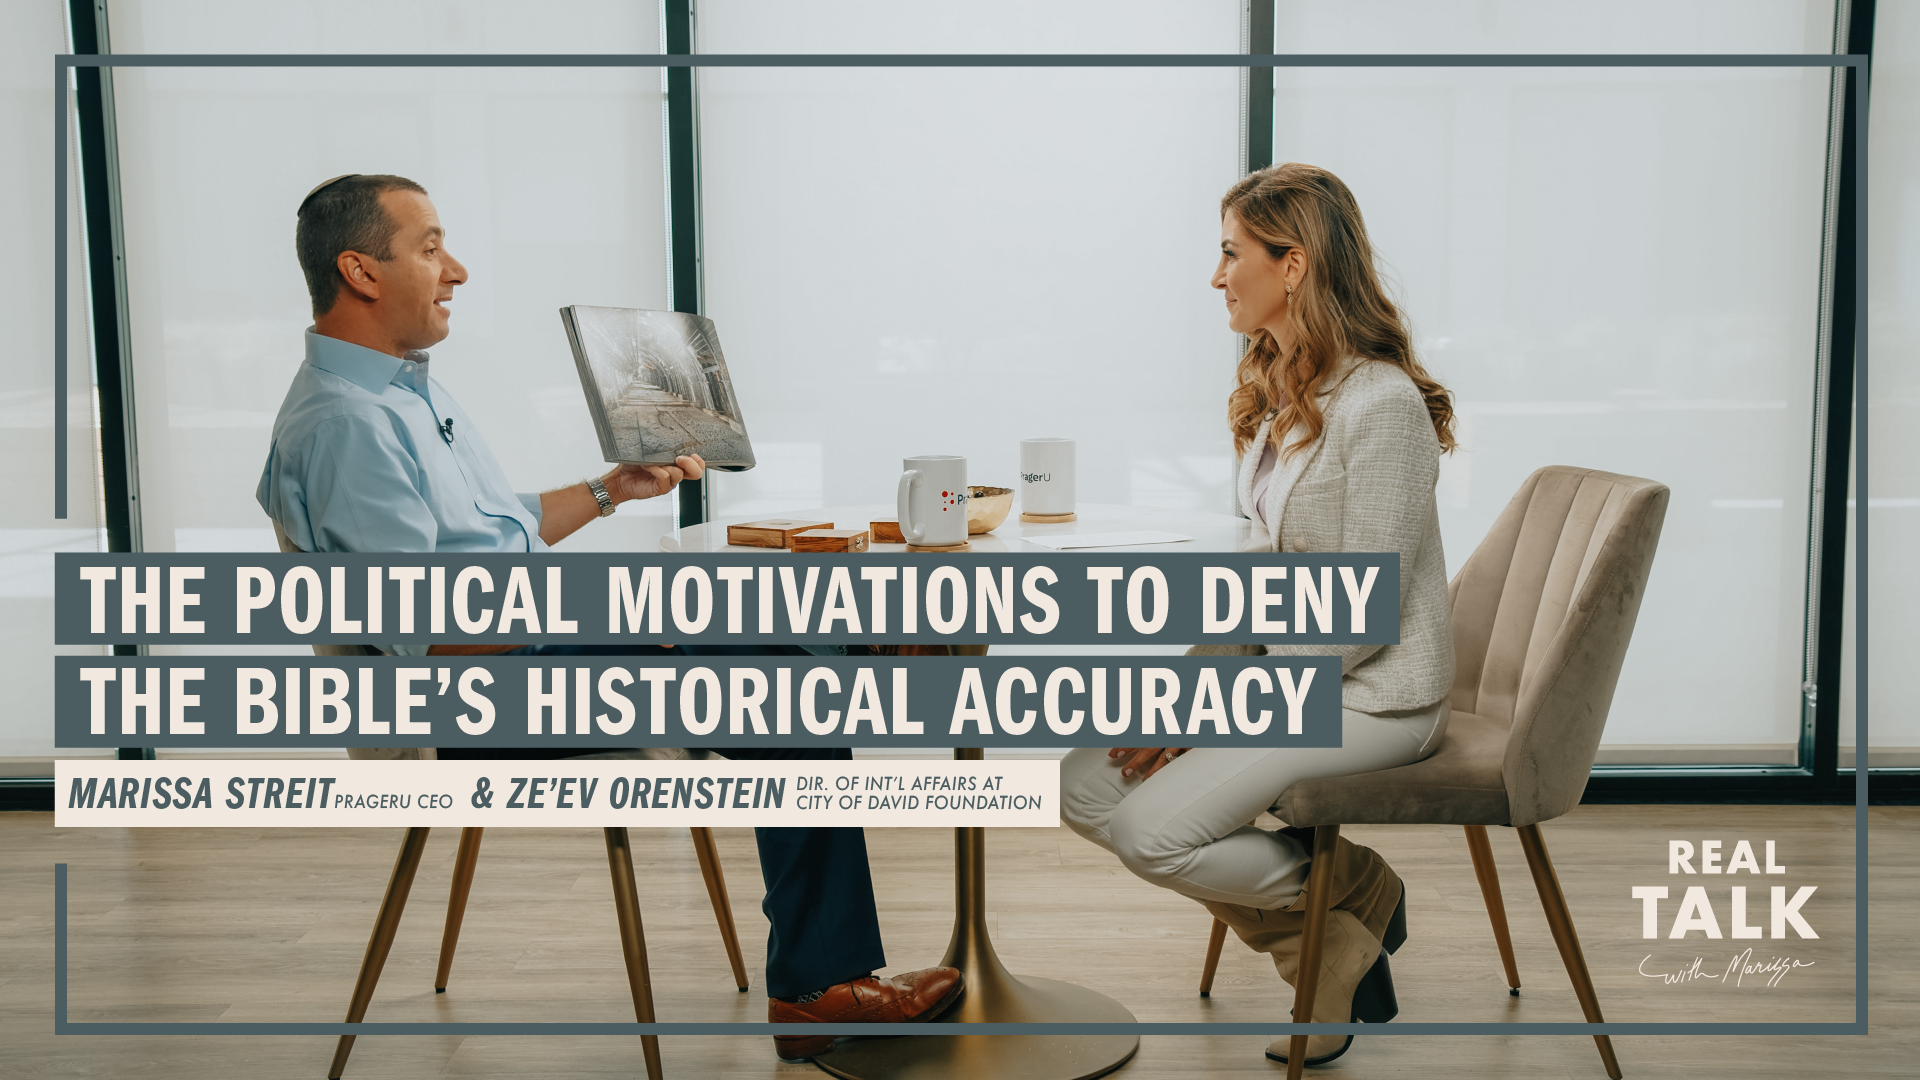 The Political Motivations to Deny the Bible’s Historical Accuracy